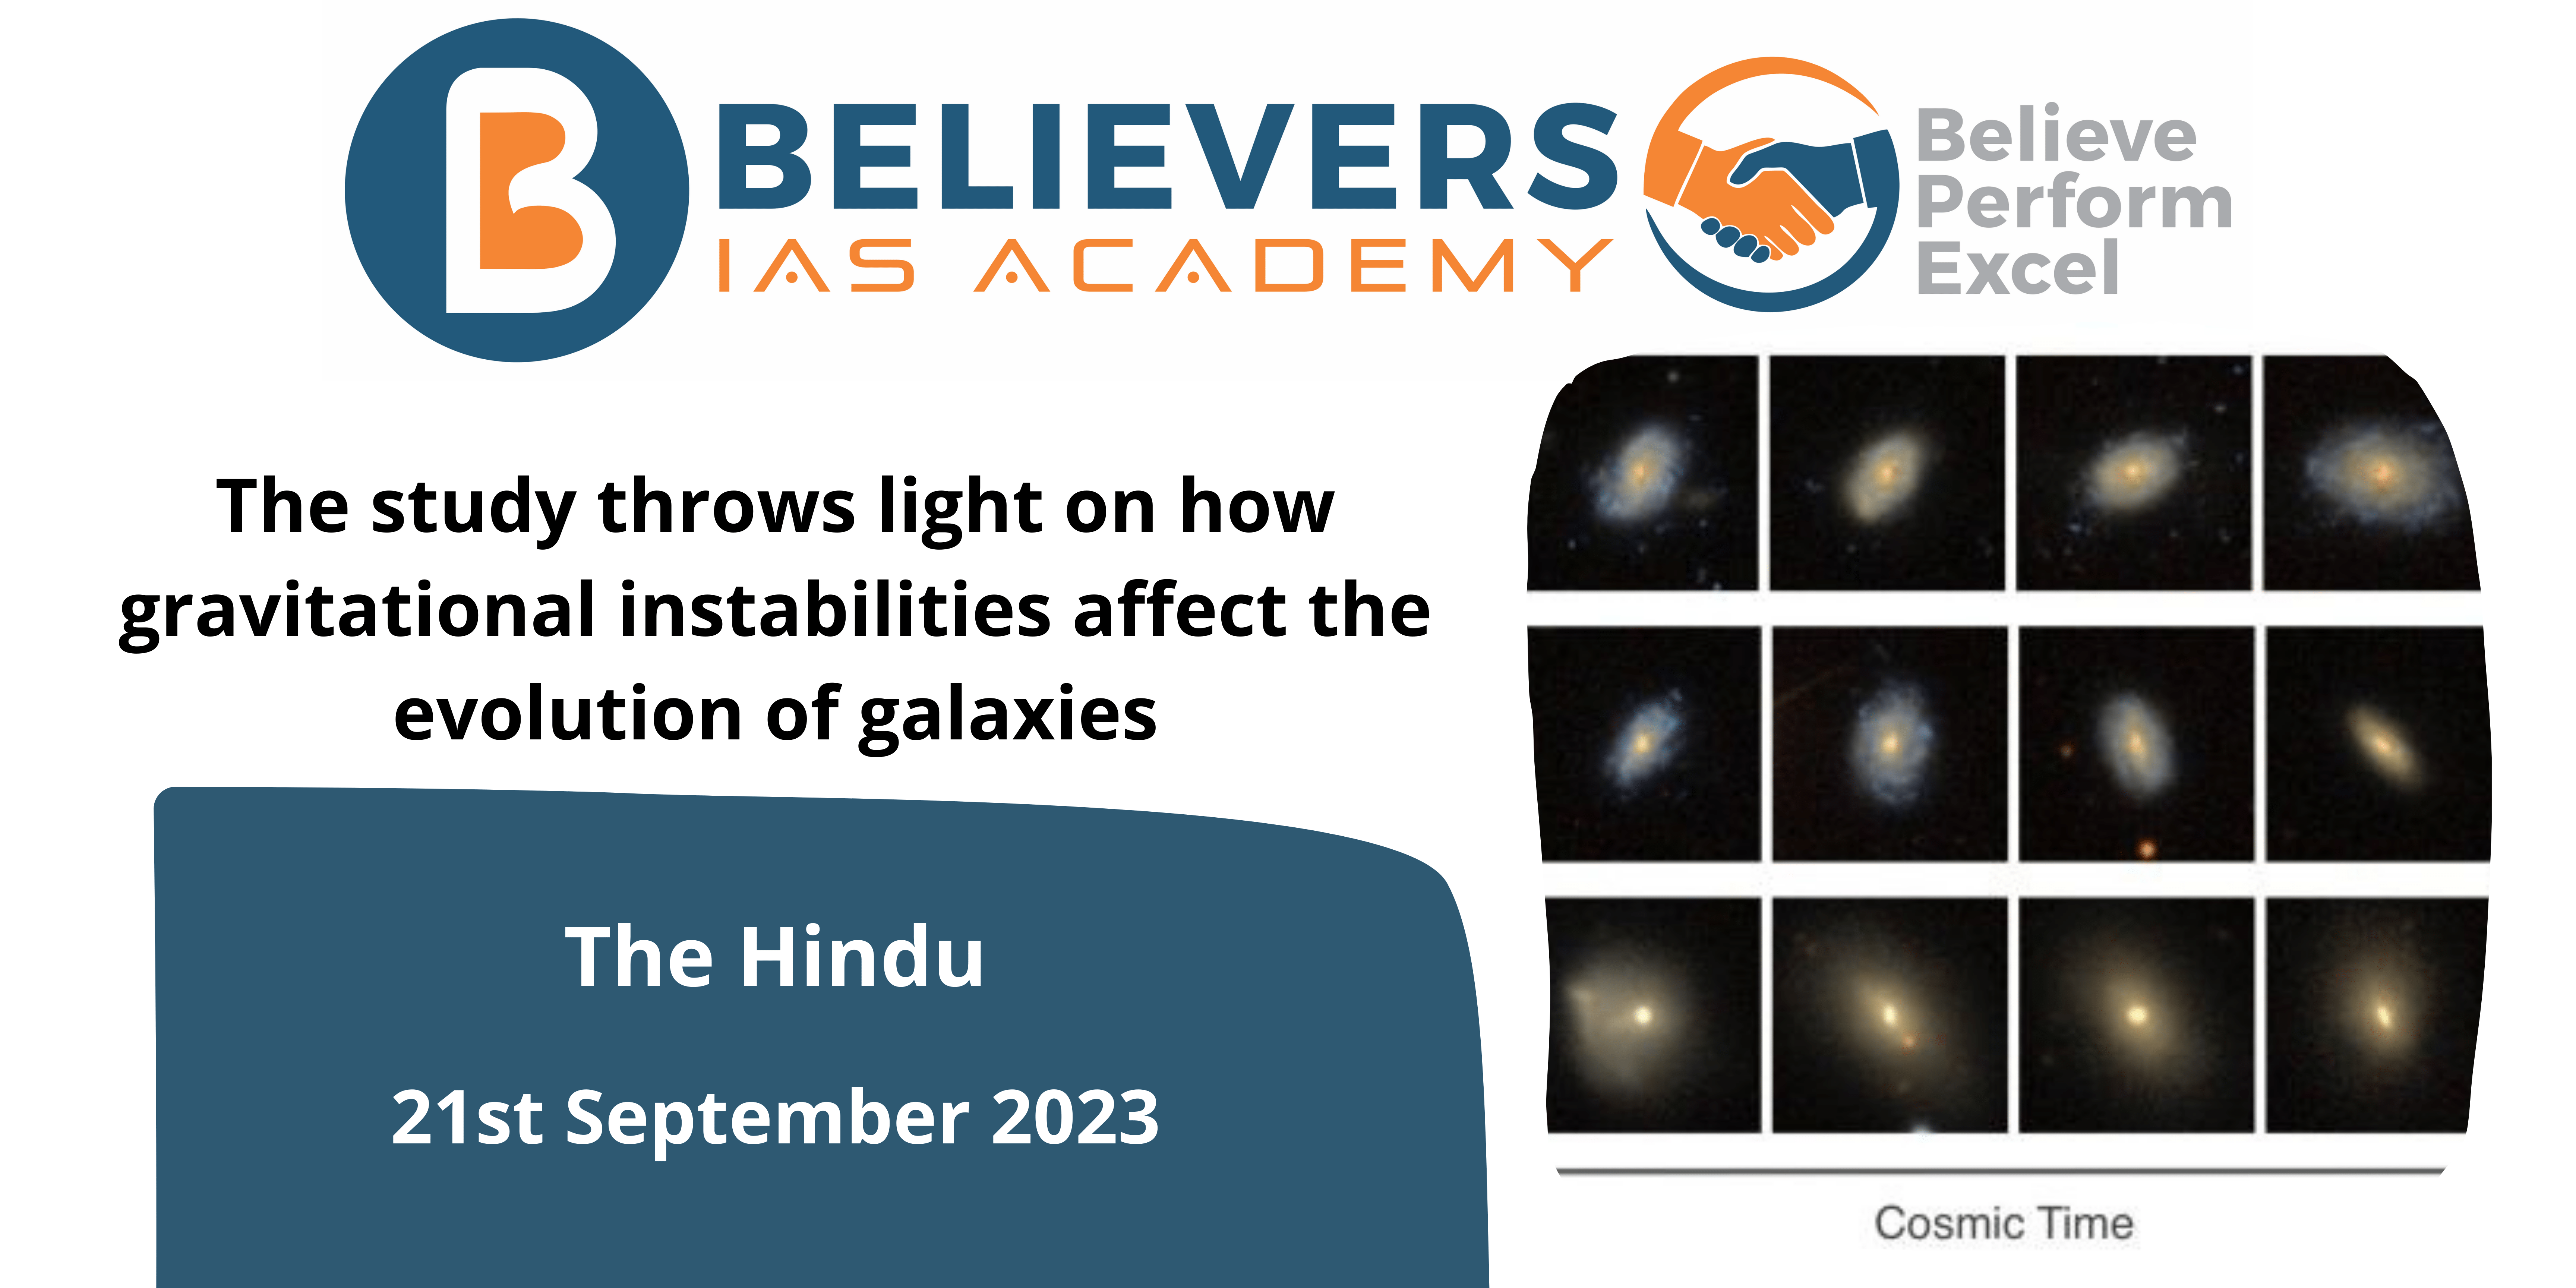 The study throws light on how gravitational instabilities affect the evolution of galaxies